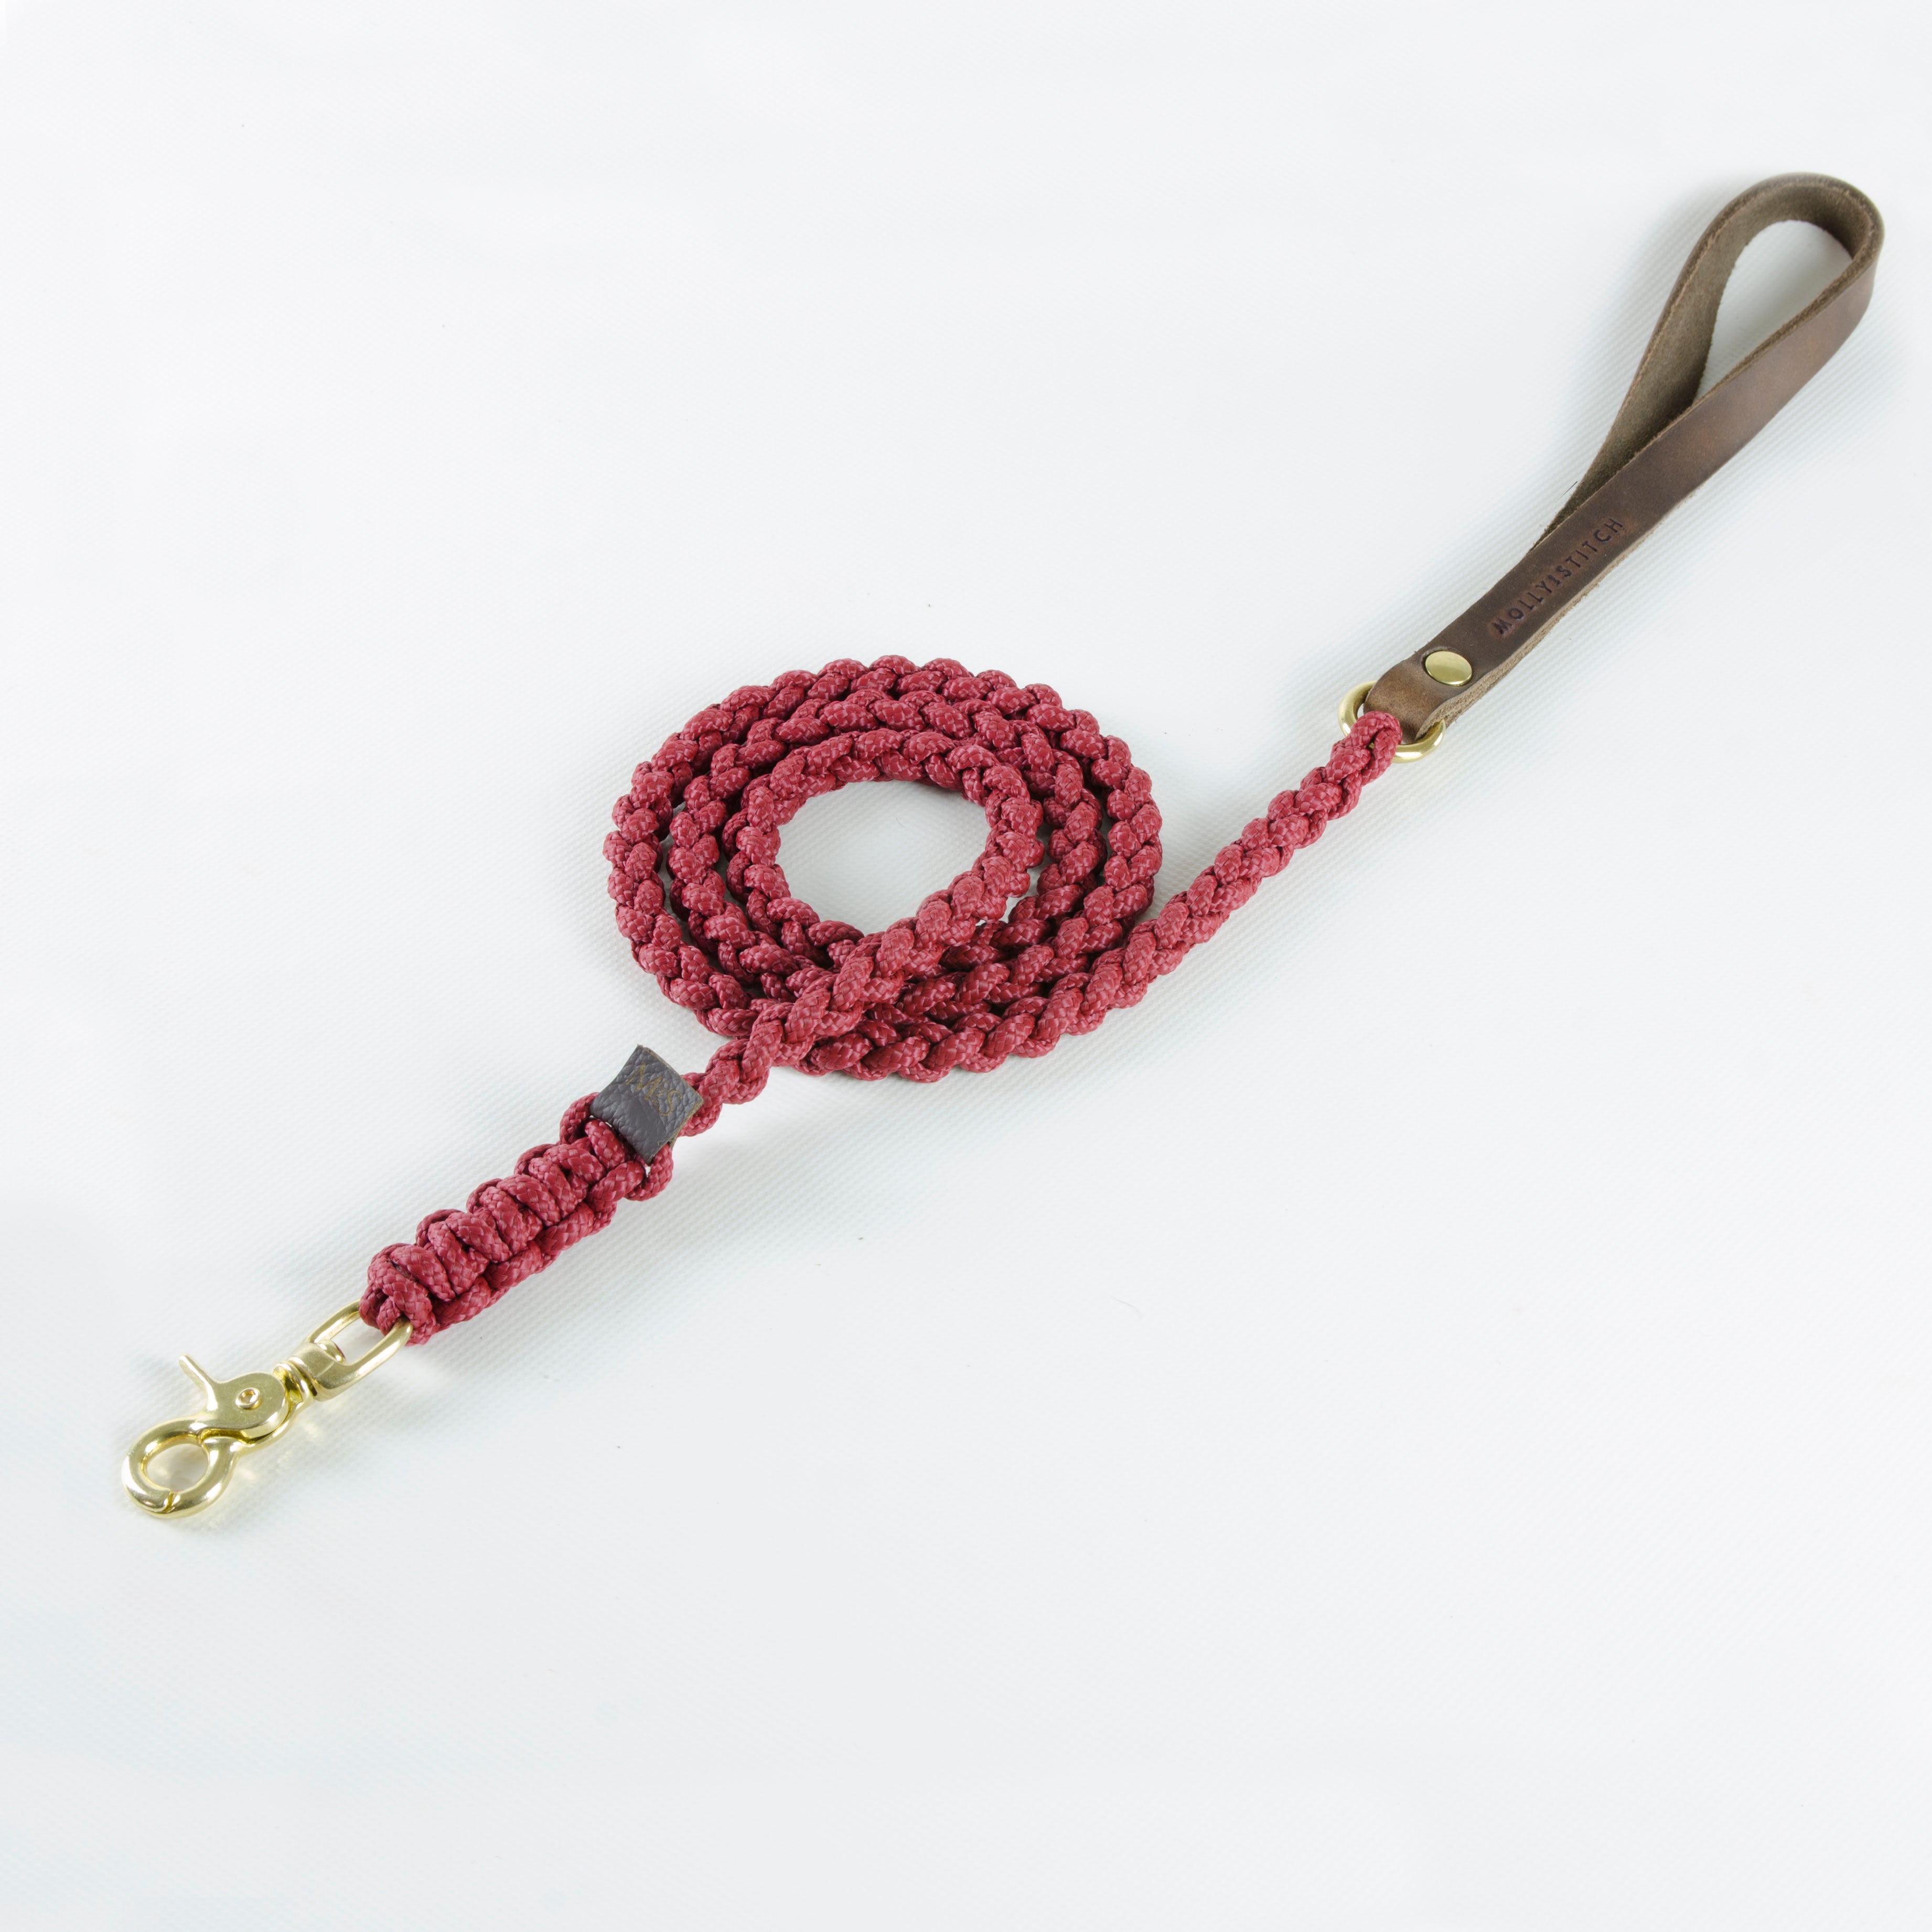 Touch of Leather Dog Leash - Redwine - Barker & Bones